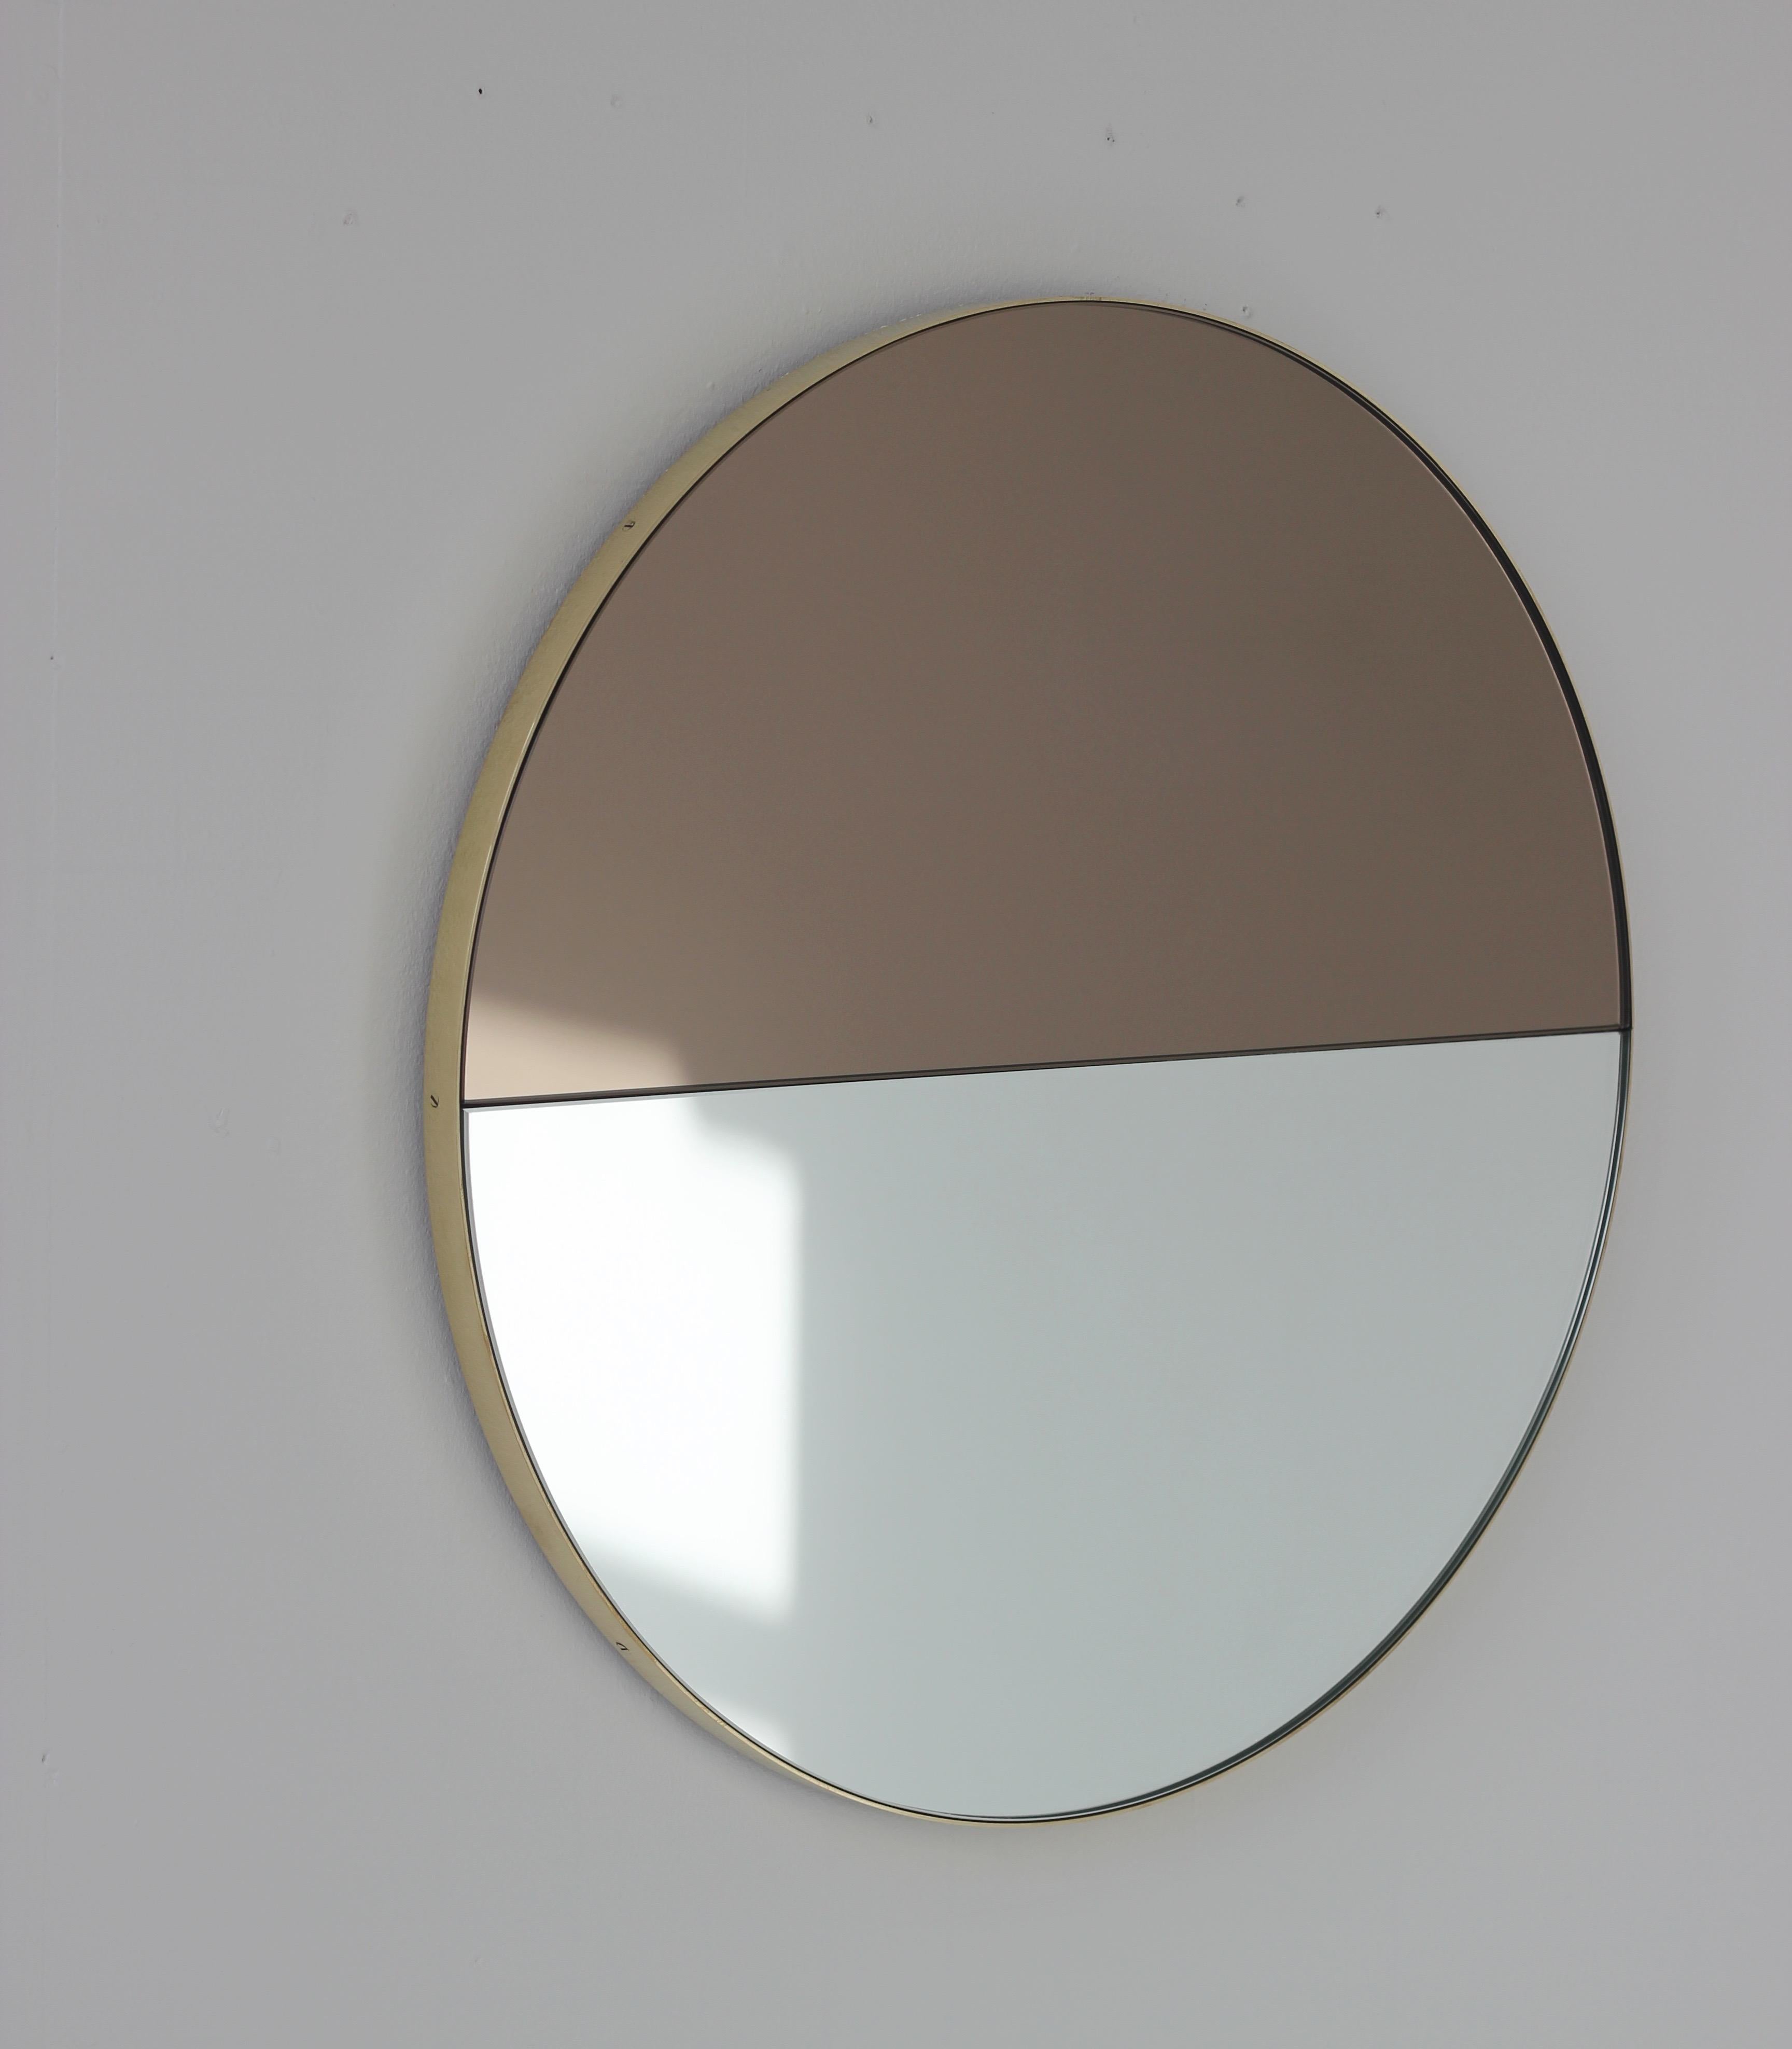 British Orbis Dualis Mixed Tinted Silver and Bronze Round Mirror with Brass Frame, XL For Sale